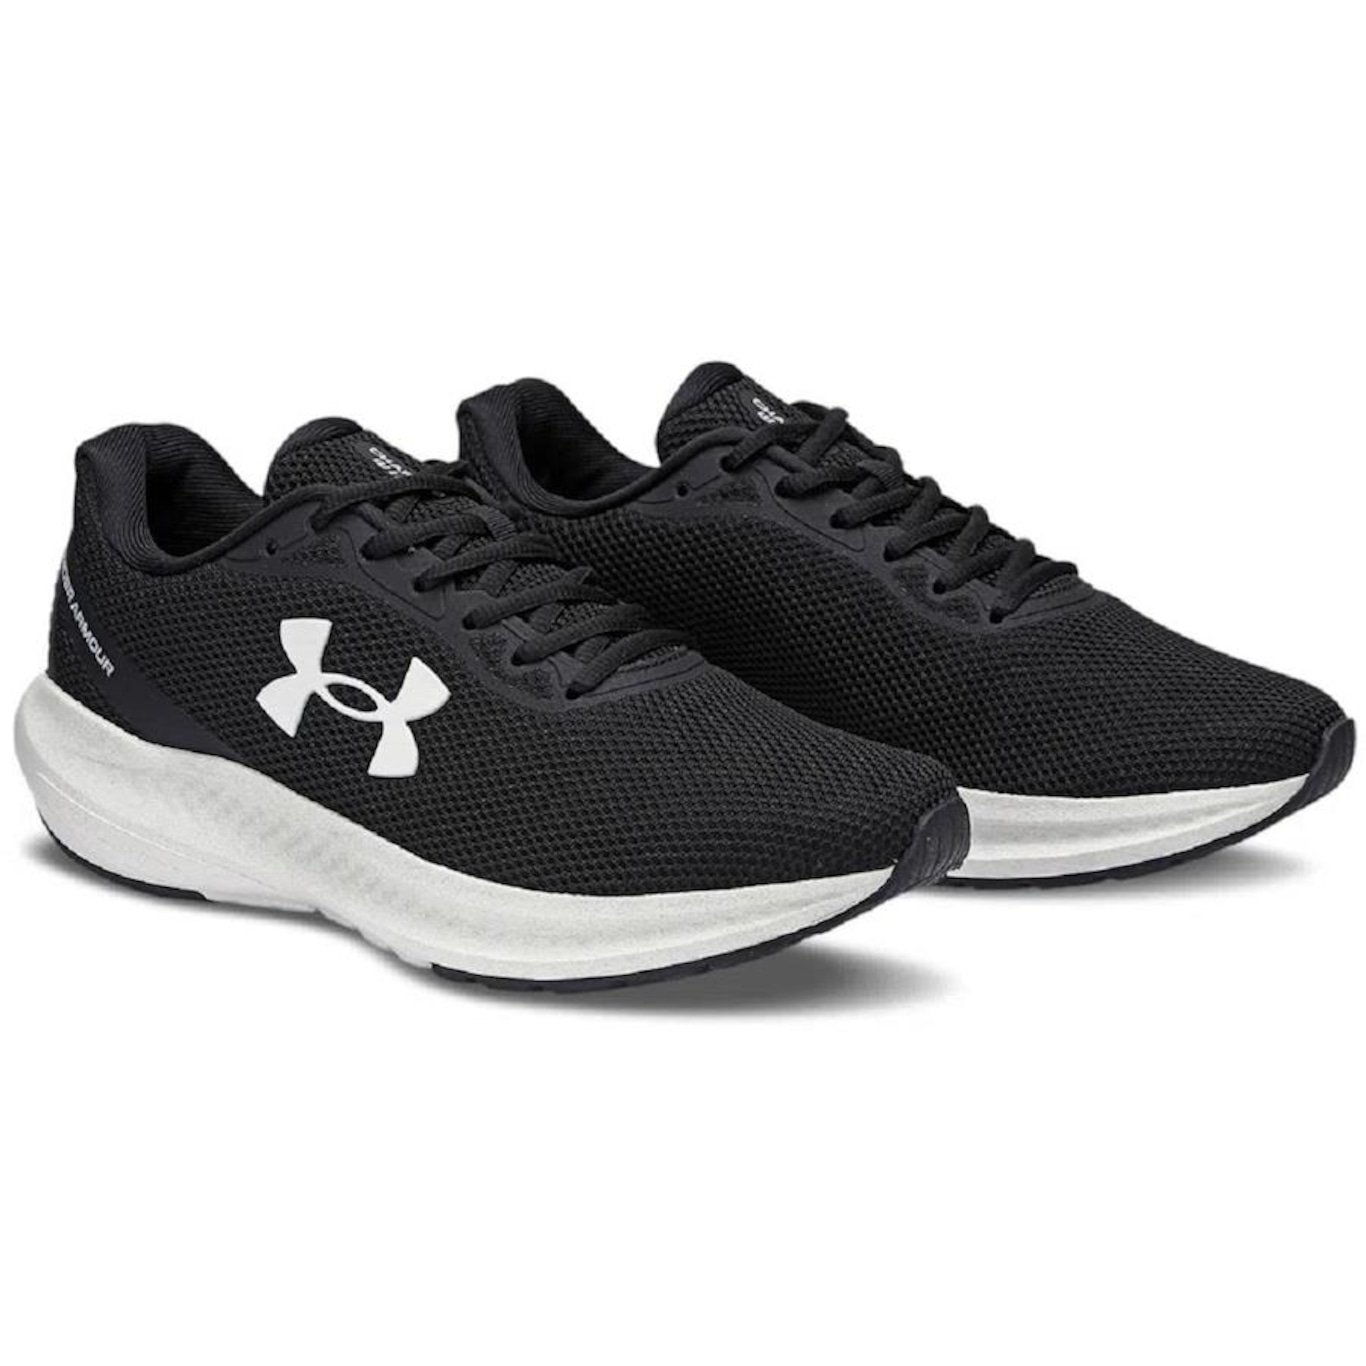 Tênis de Corrida Under Armour Charged Wing Masculino